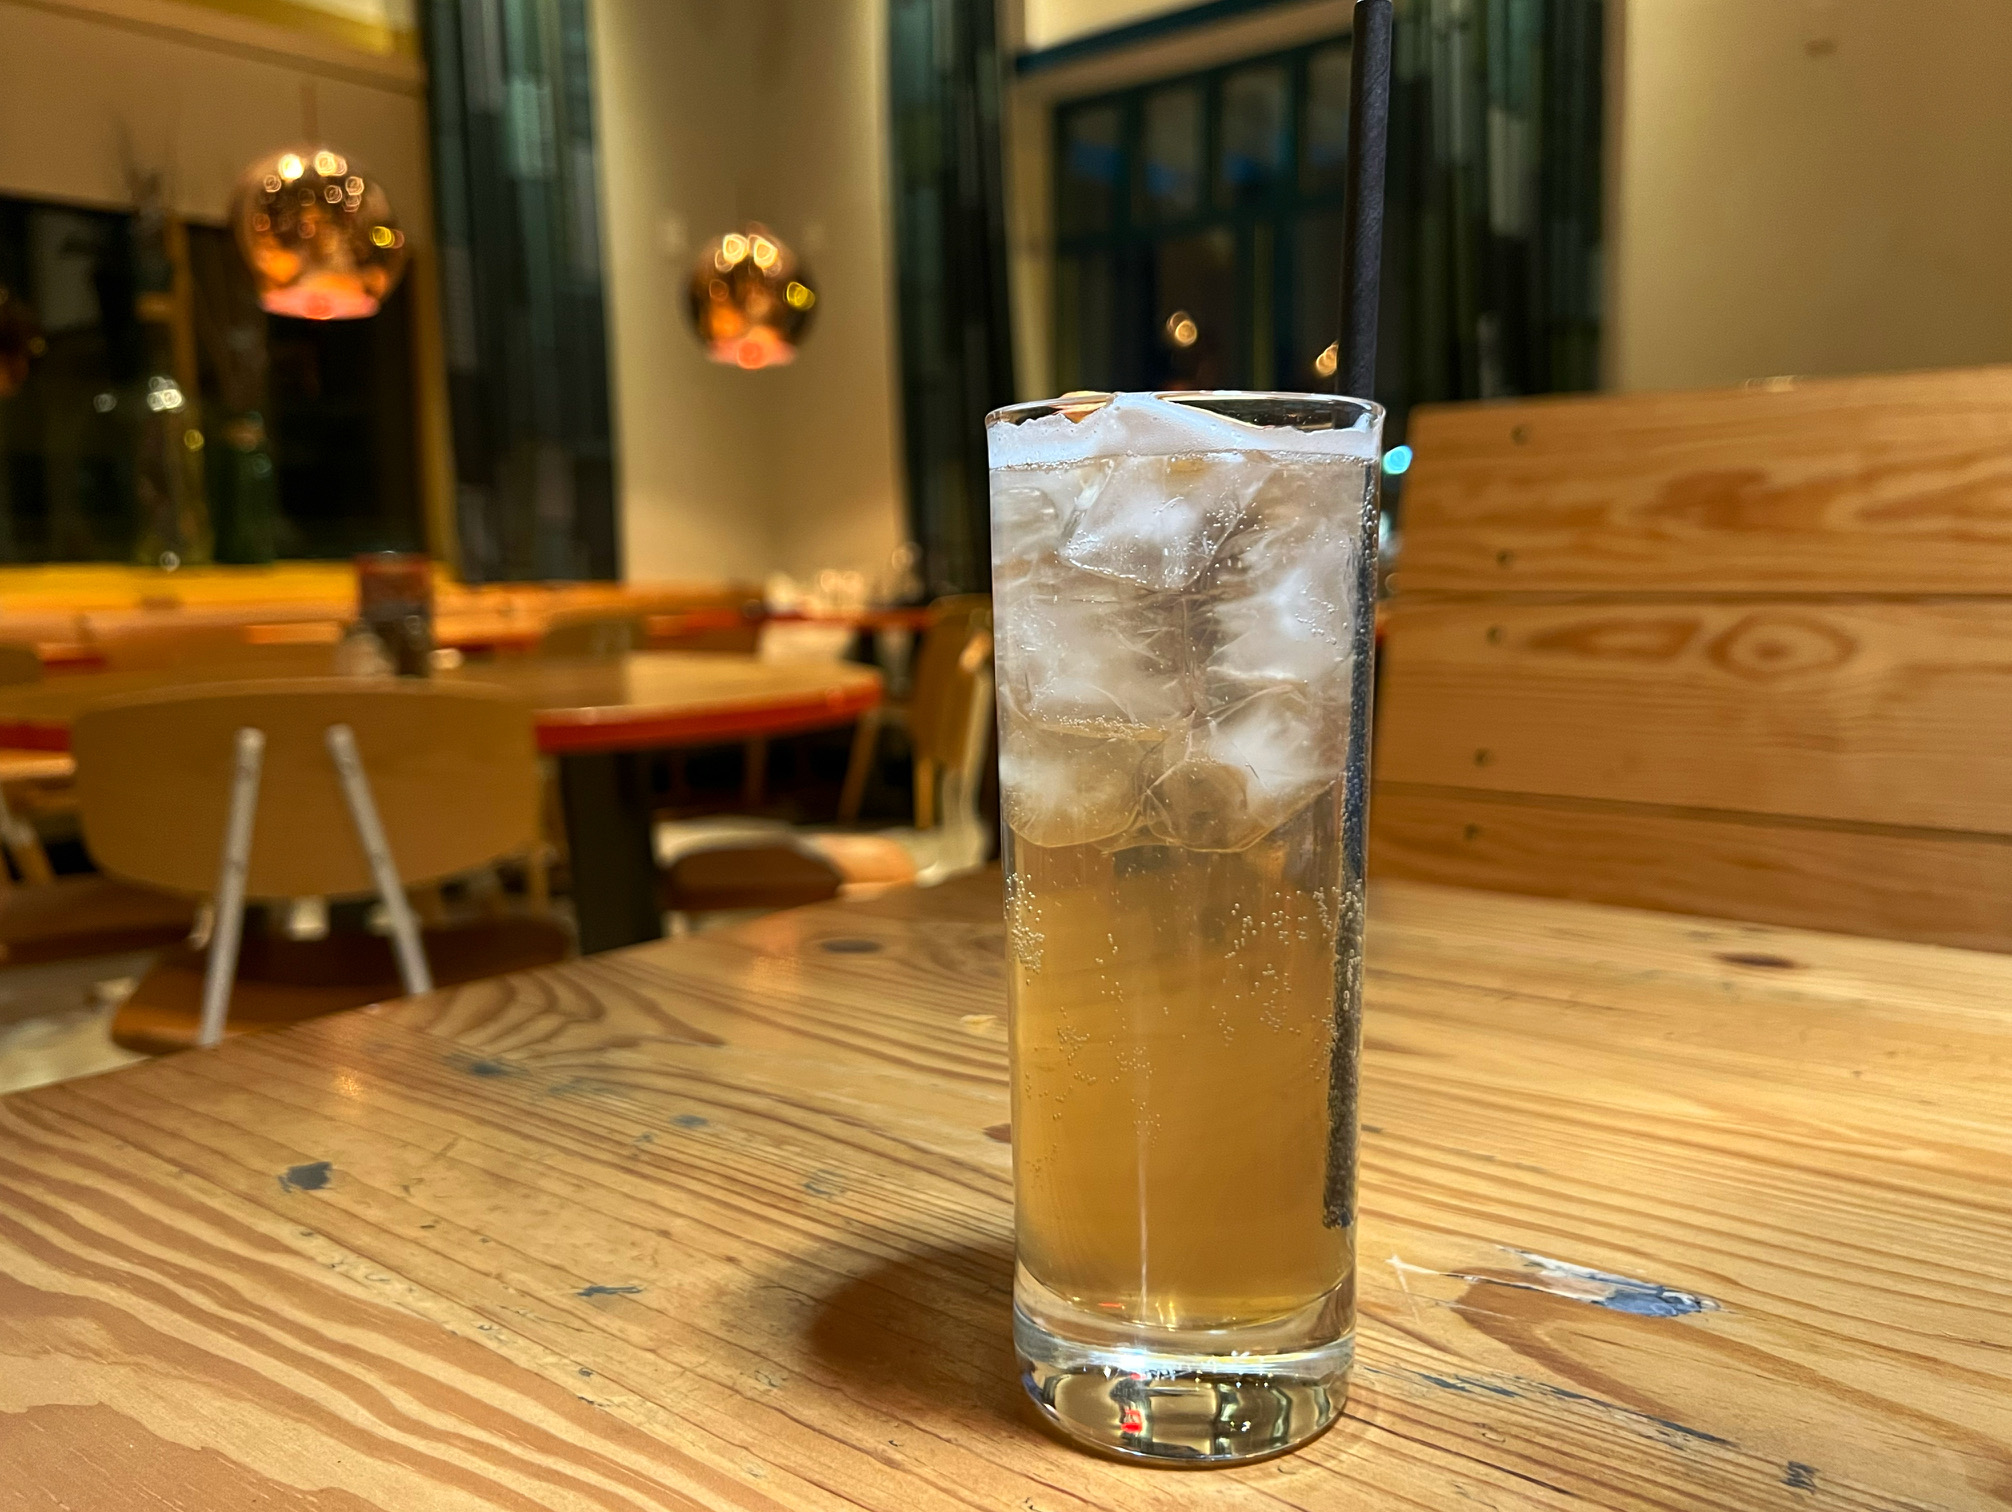 On a wooden table, there is a tall skinny glass with a light brown drink . Photo by Alyssa Buckley.